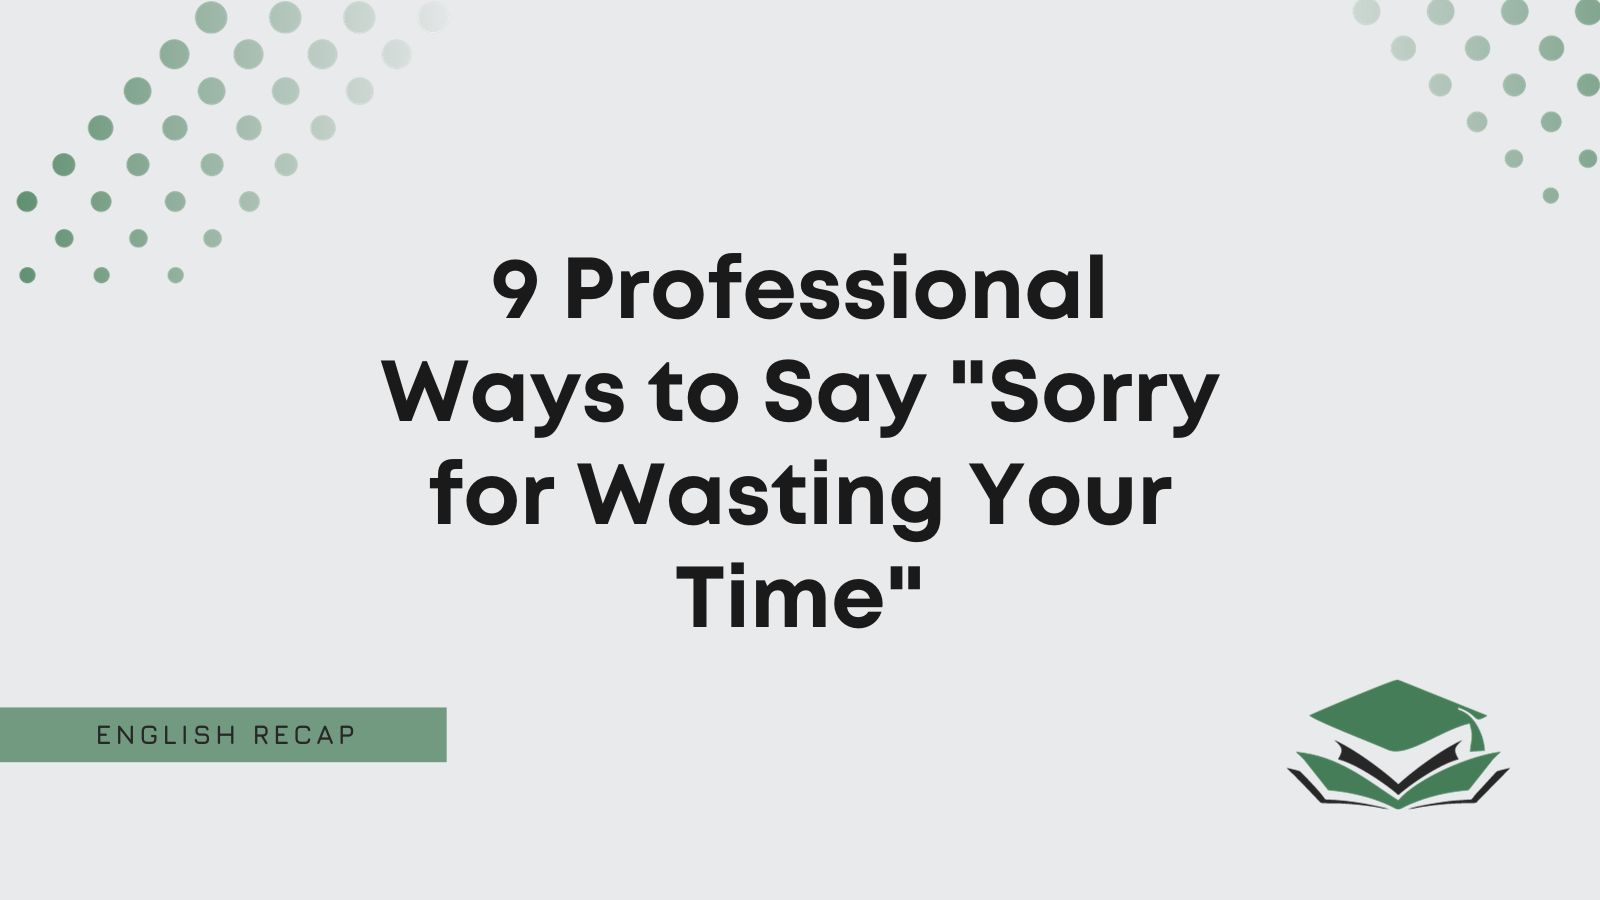 9 Professional Ways to Say "Sorry for Wasting Your Time" English Recap